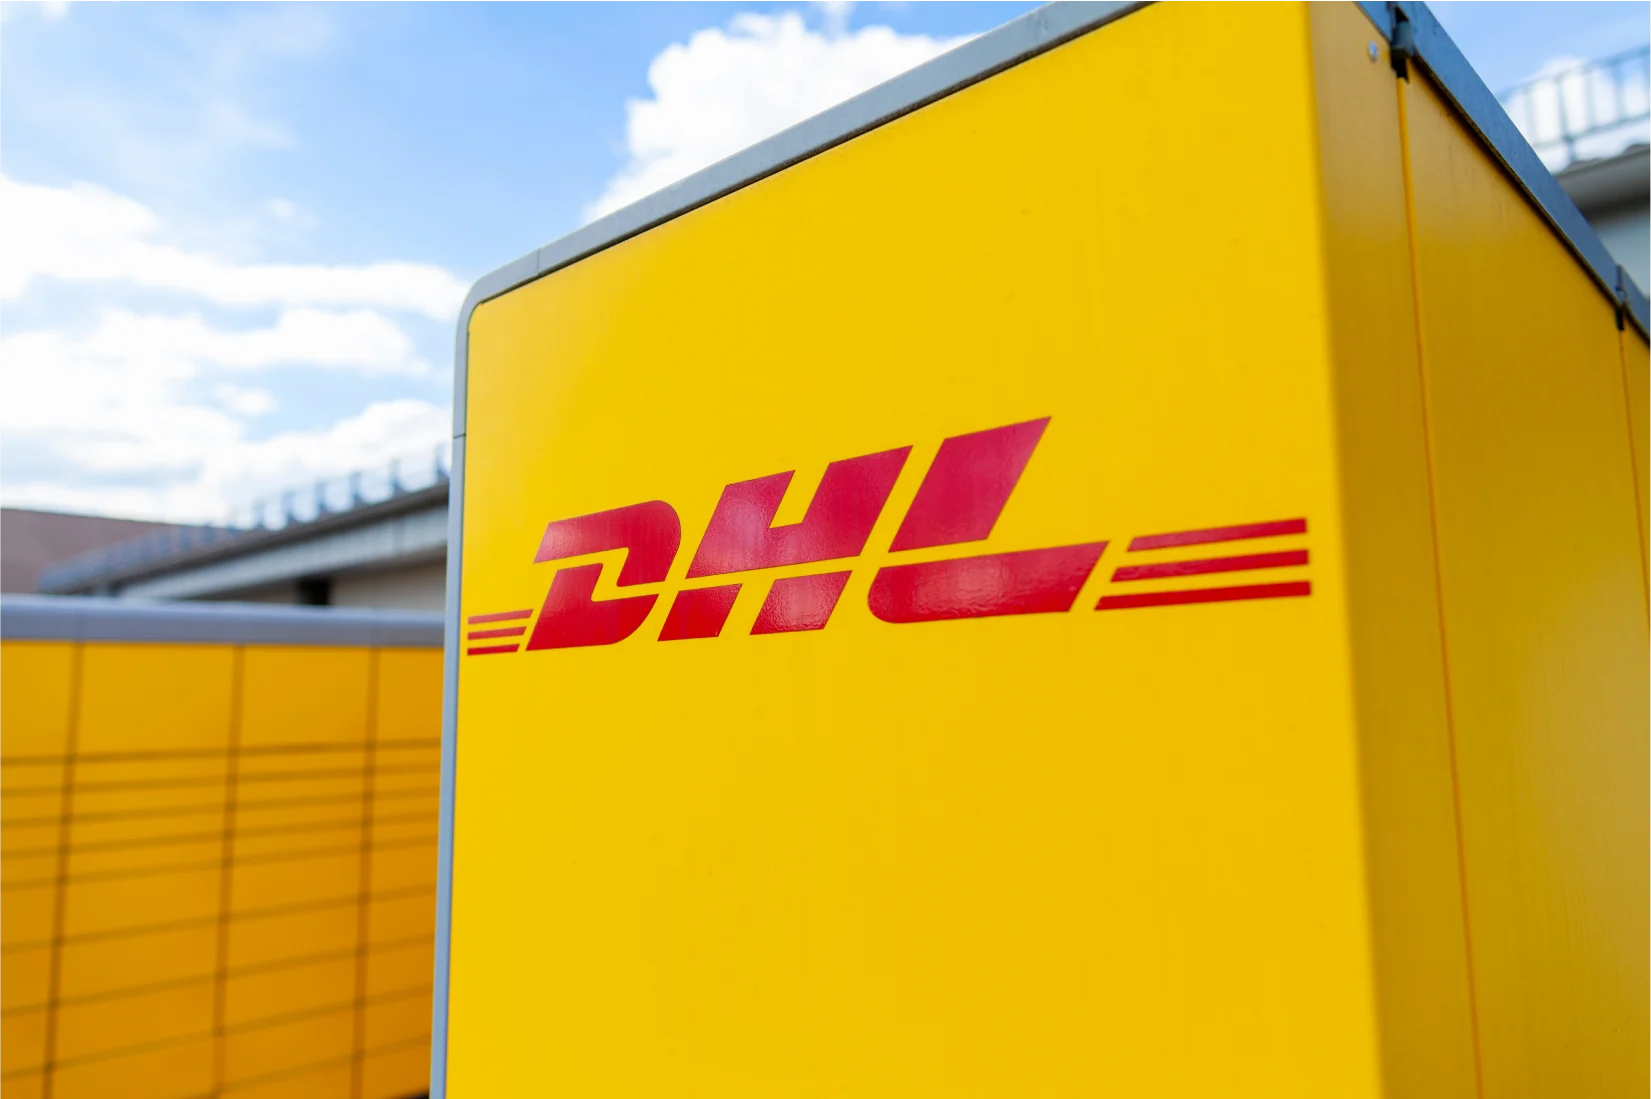 DHL drop off point